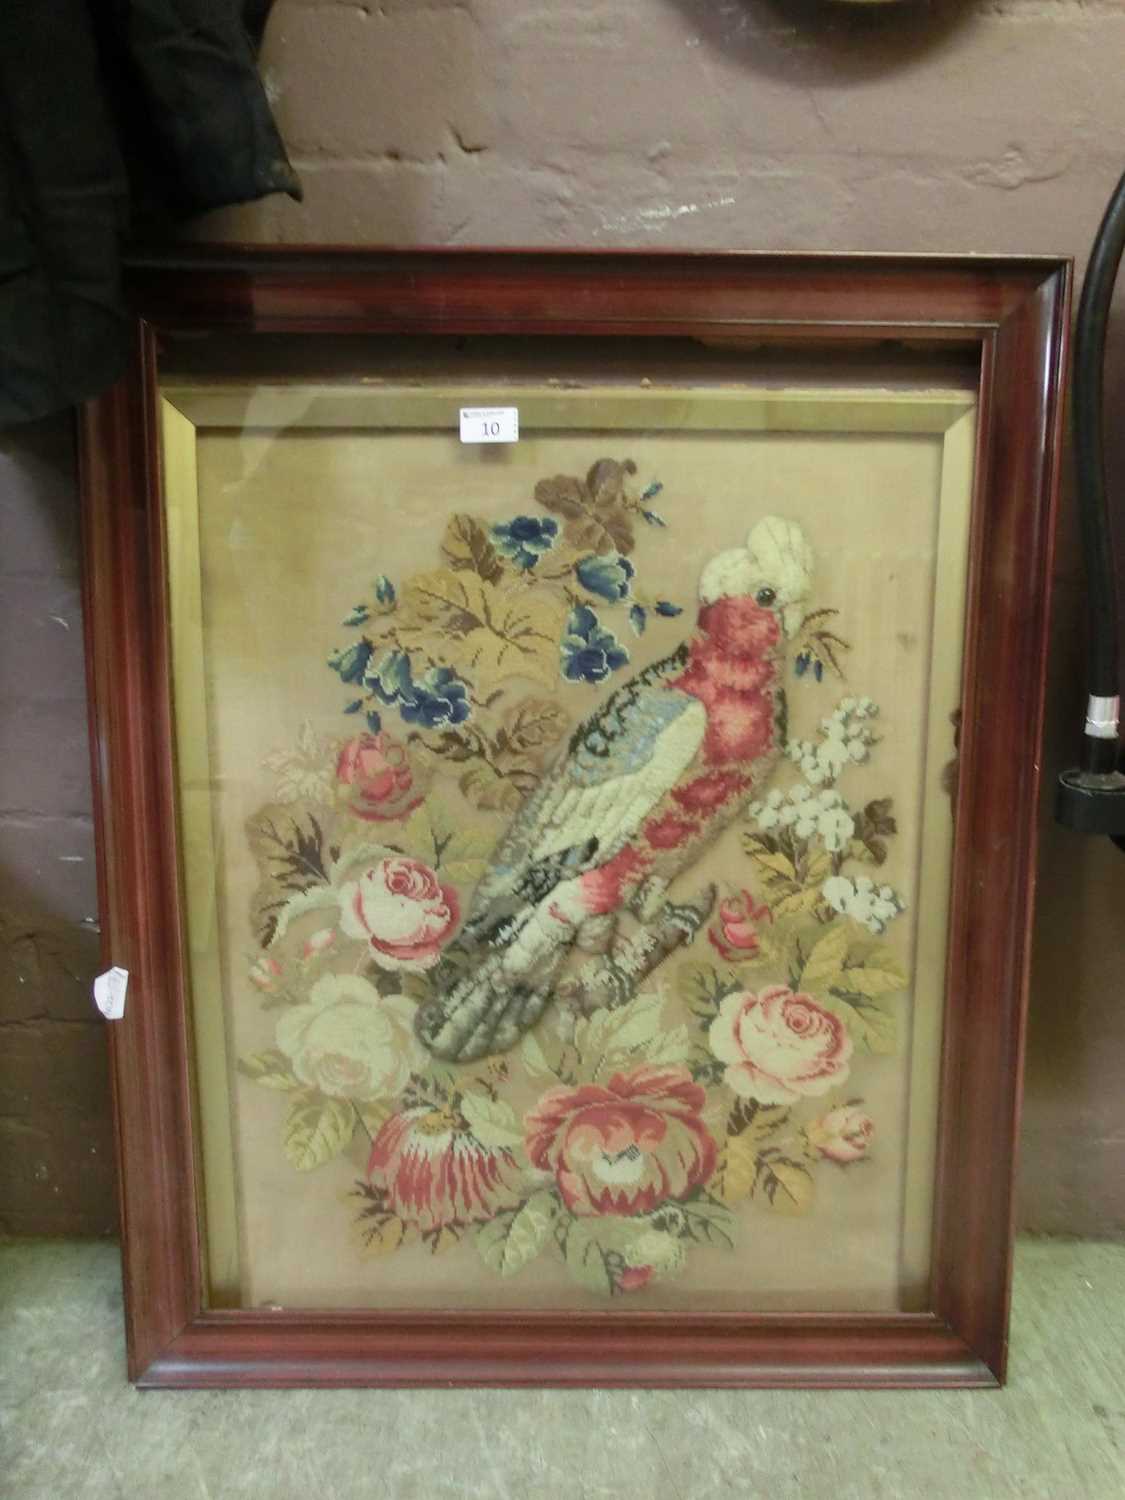 A framed and glazed 19th century needlework of parrot amidst flowers